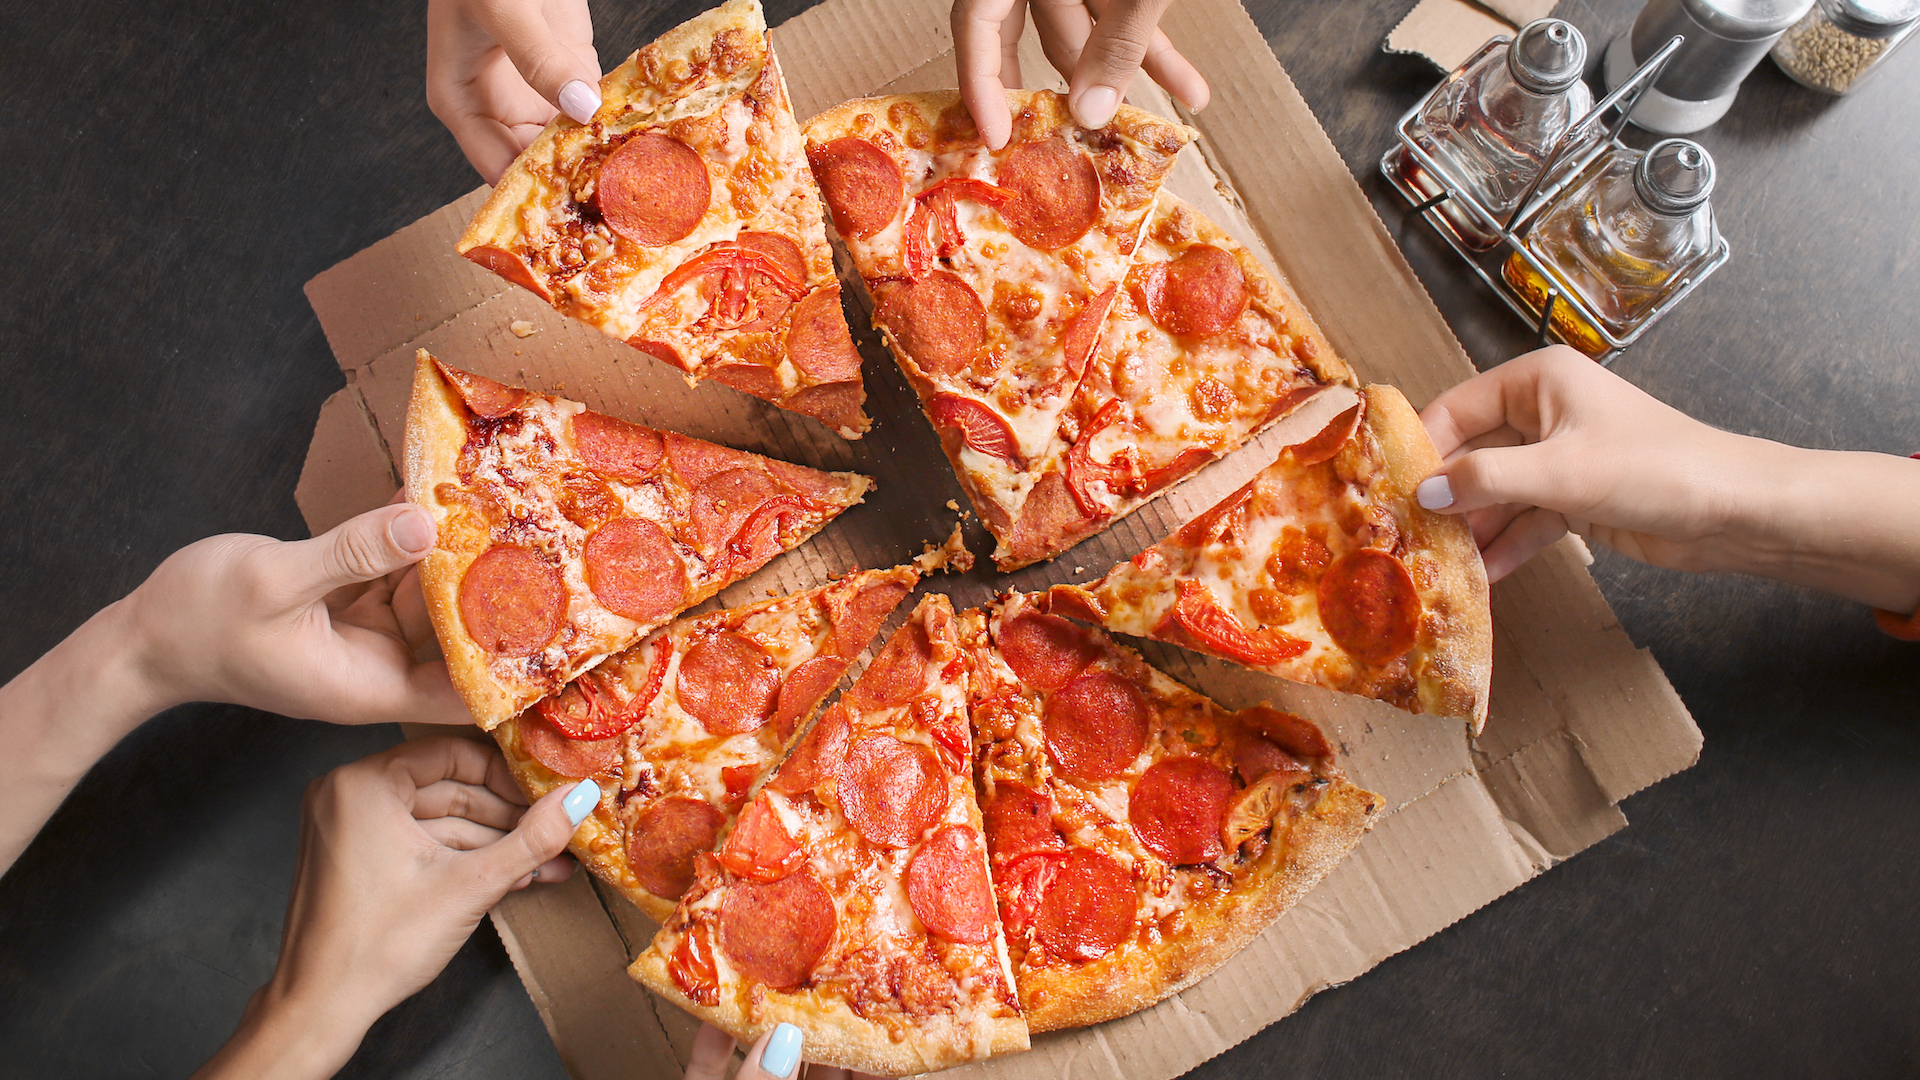 A group of people share a pepperoni pizza